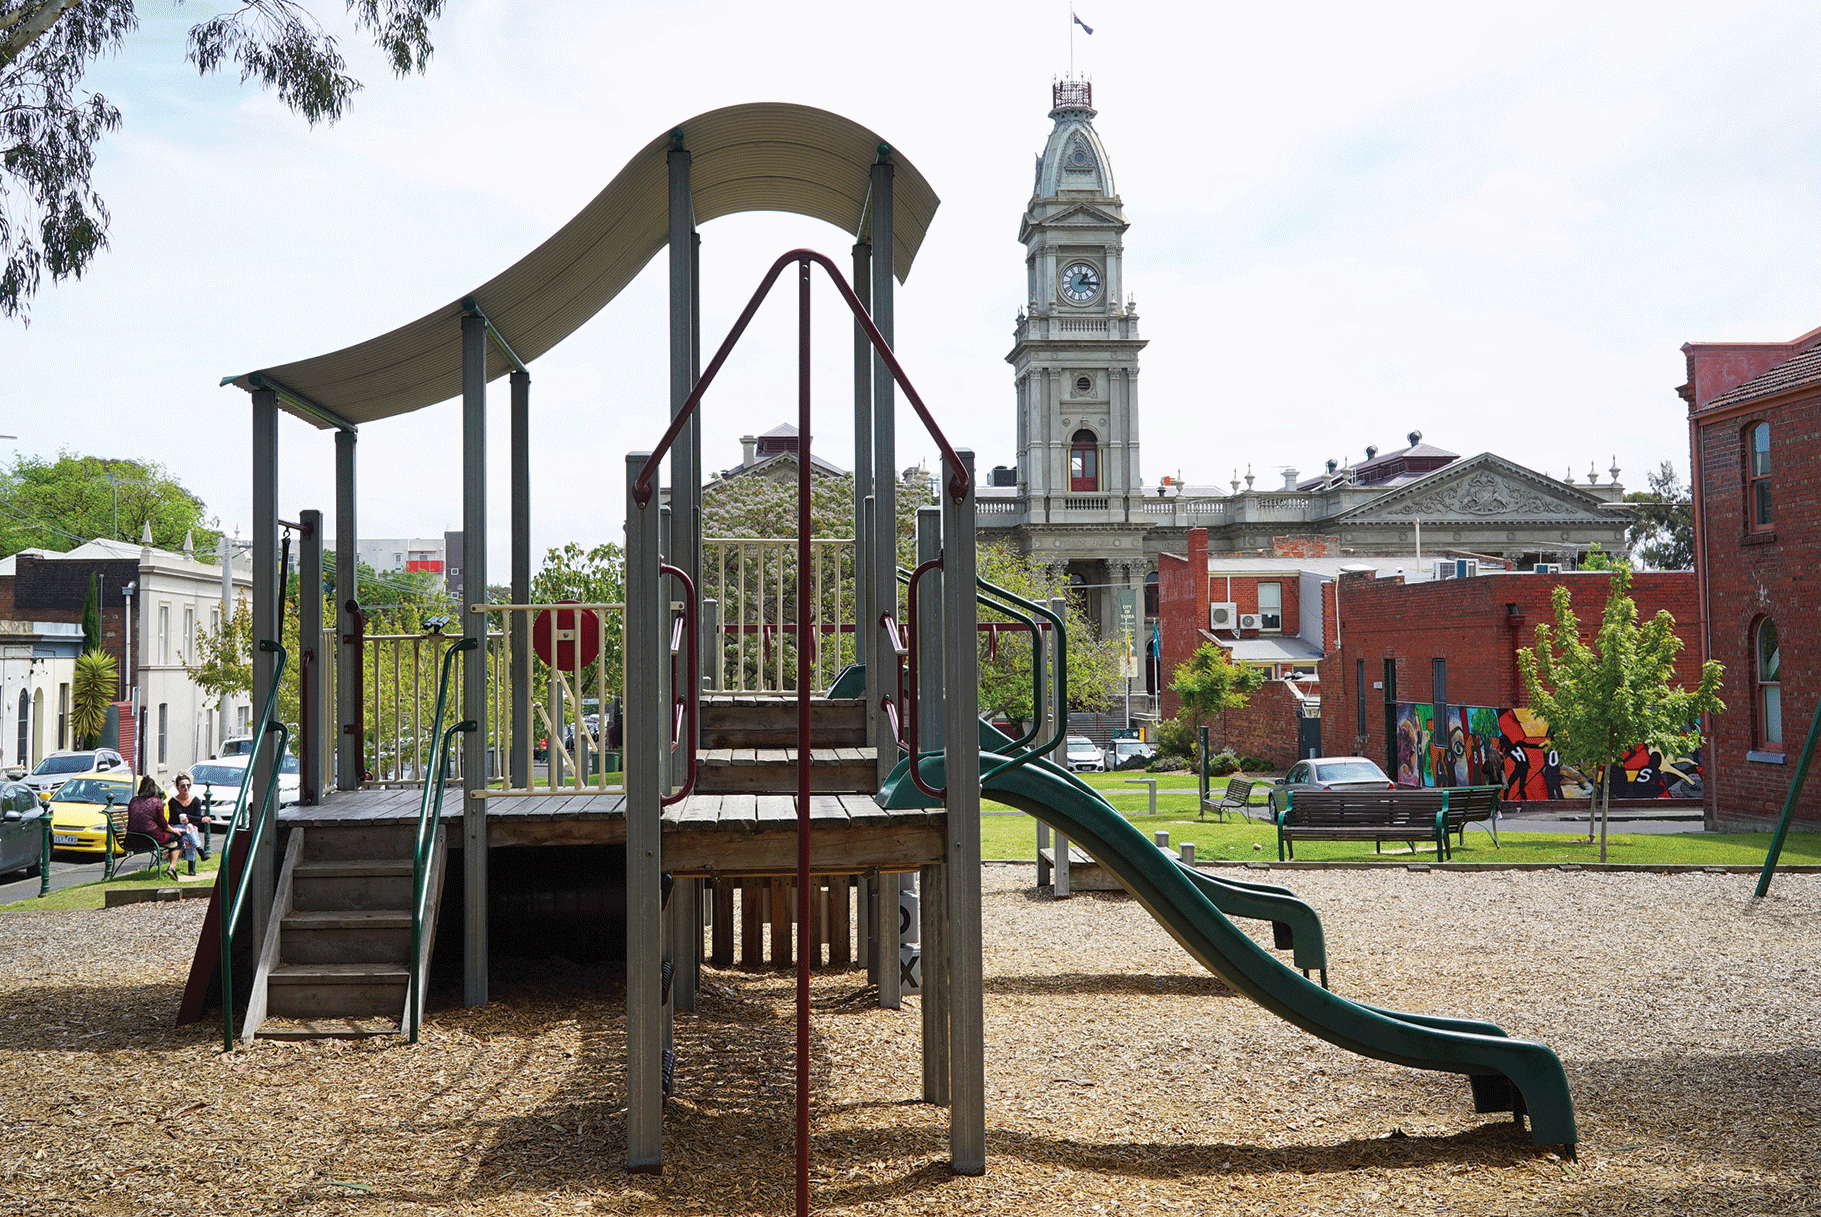 A playground with a wave shaped roof and a clock twoer in the background